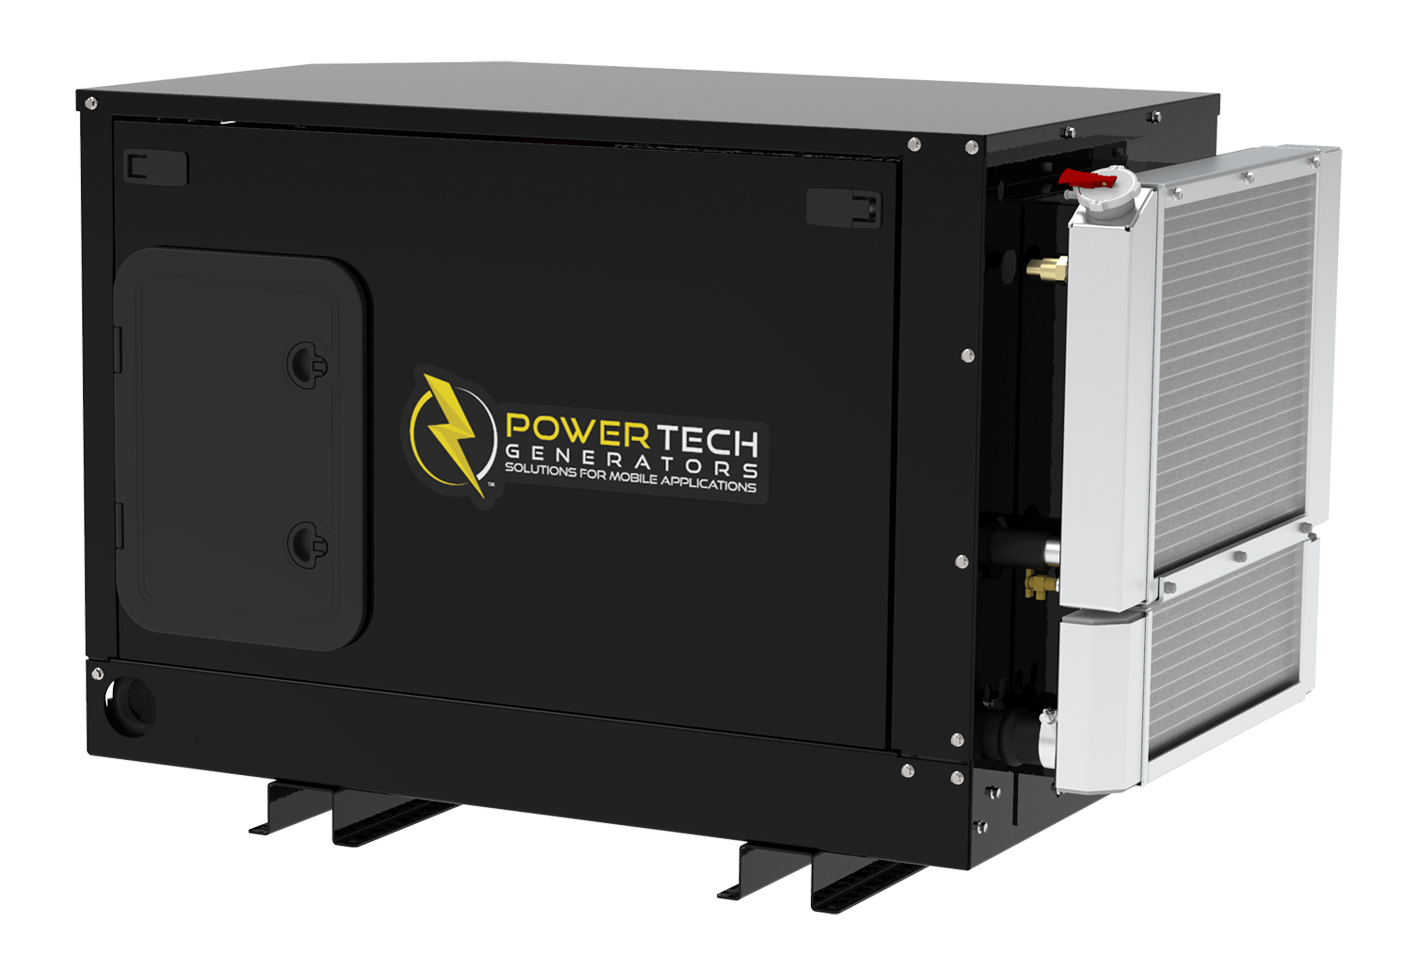 PowerTech Generator with product improvements for specialty vehicle and trailer manufacturers